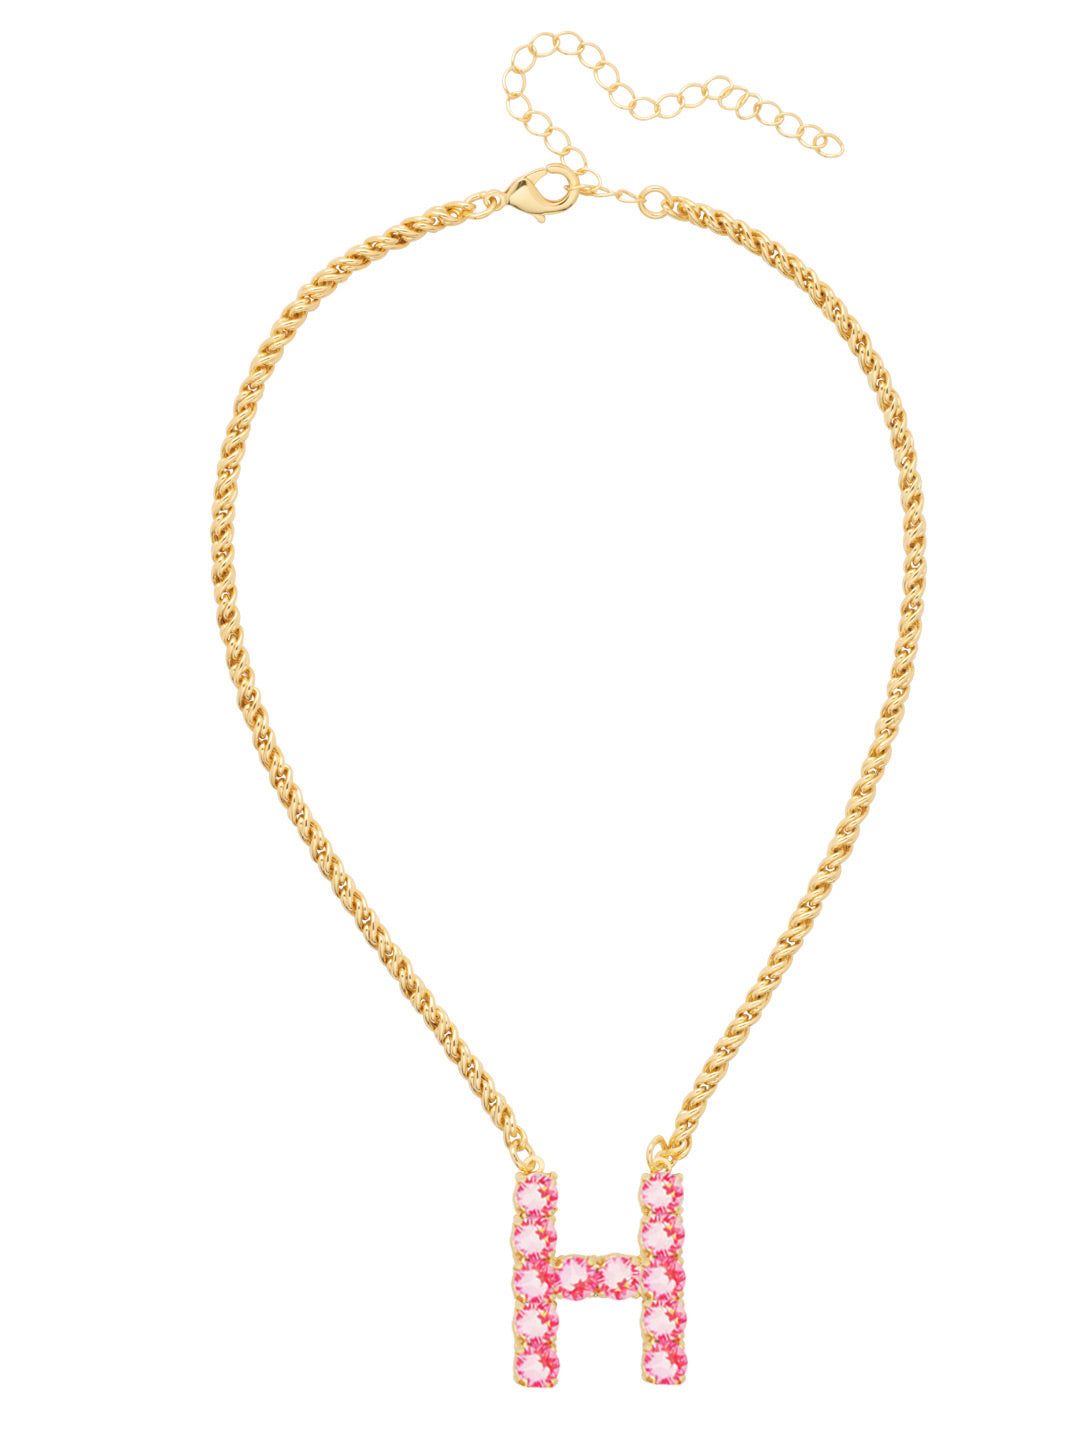 H Initial Rope Pendant Necklace - NFK27BGETP - <p>The Initial Rope Pendant Necklace features a crystal encrusted metal monogram pendant on an adjustable rope chain, secured with a lobster claw clasp. From Sorrelli's Electric Pink collection in our Bright Gold-tone finish.</p>